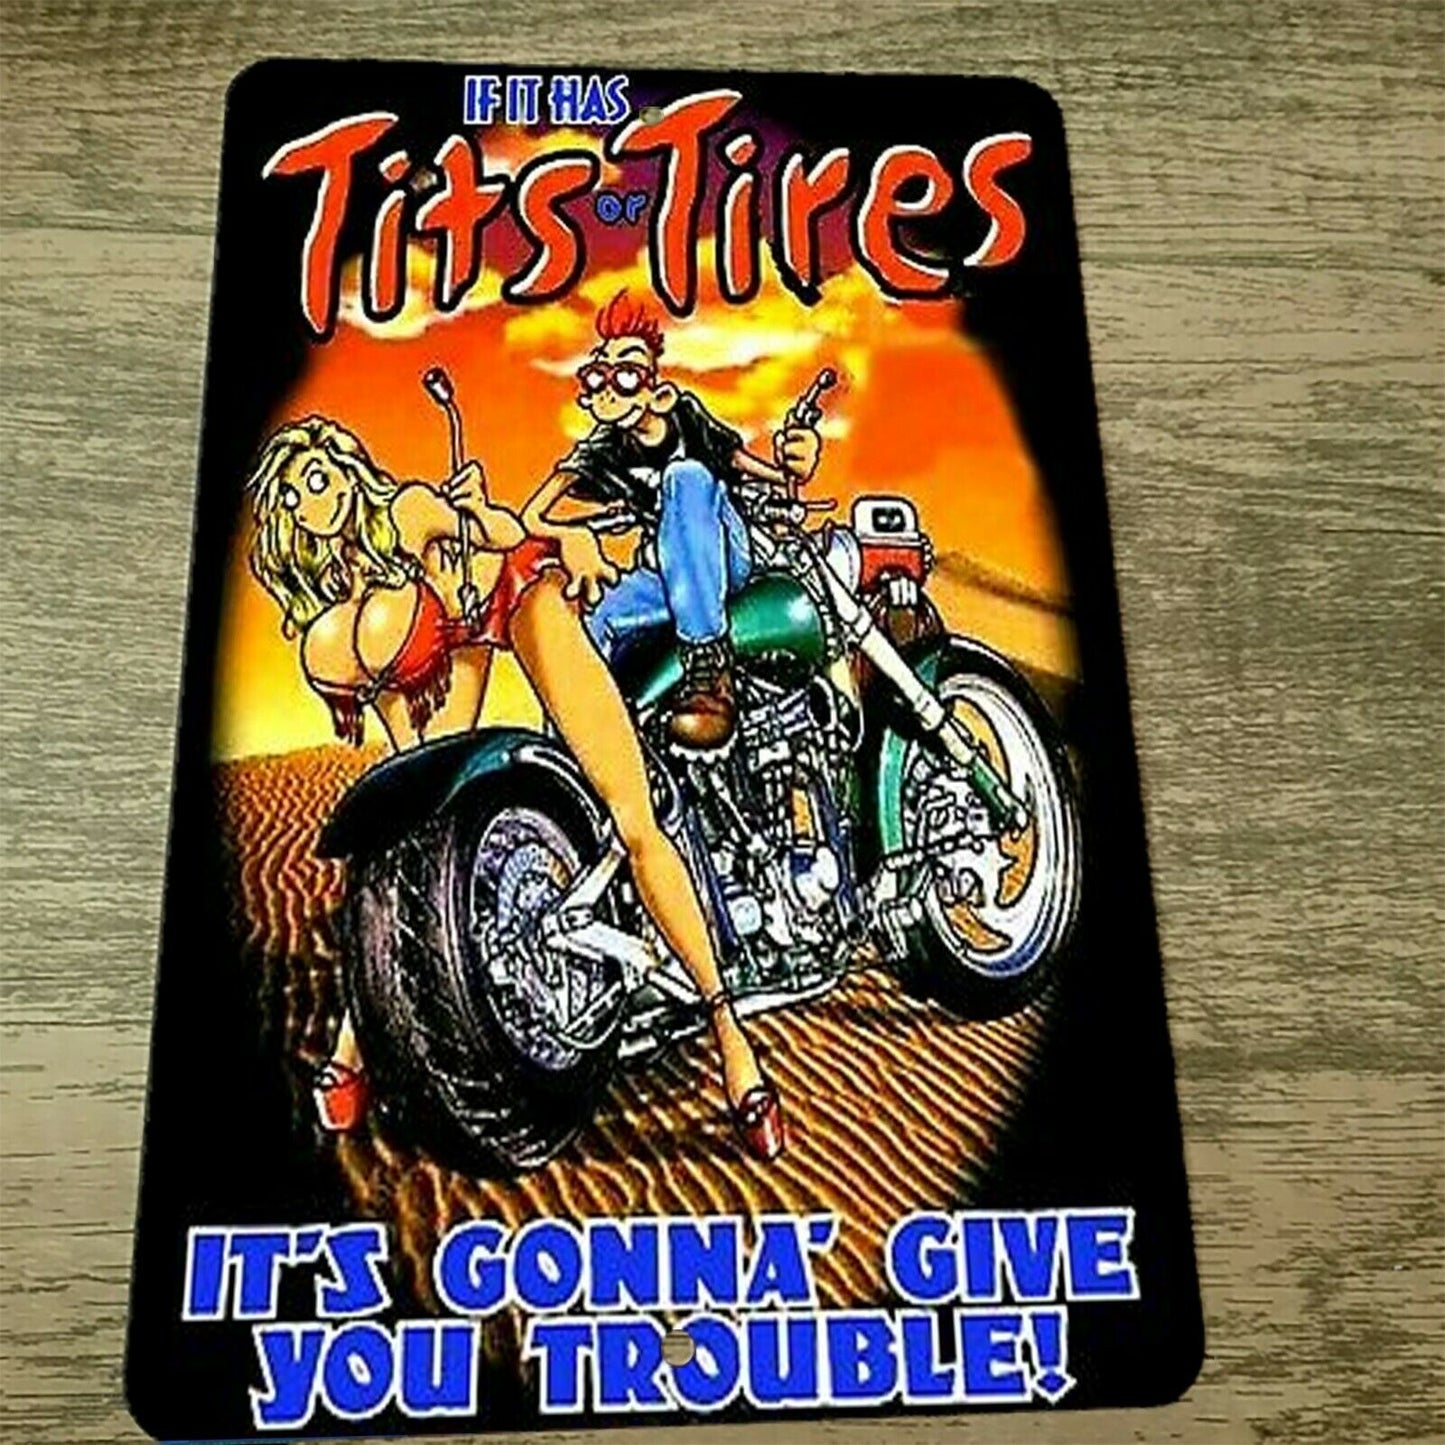 If it has Tits orTires its Gonna Give you trouble 8x12 Metal Wall Sign Garage Poster